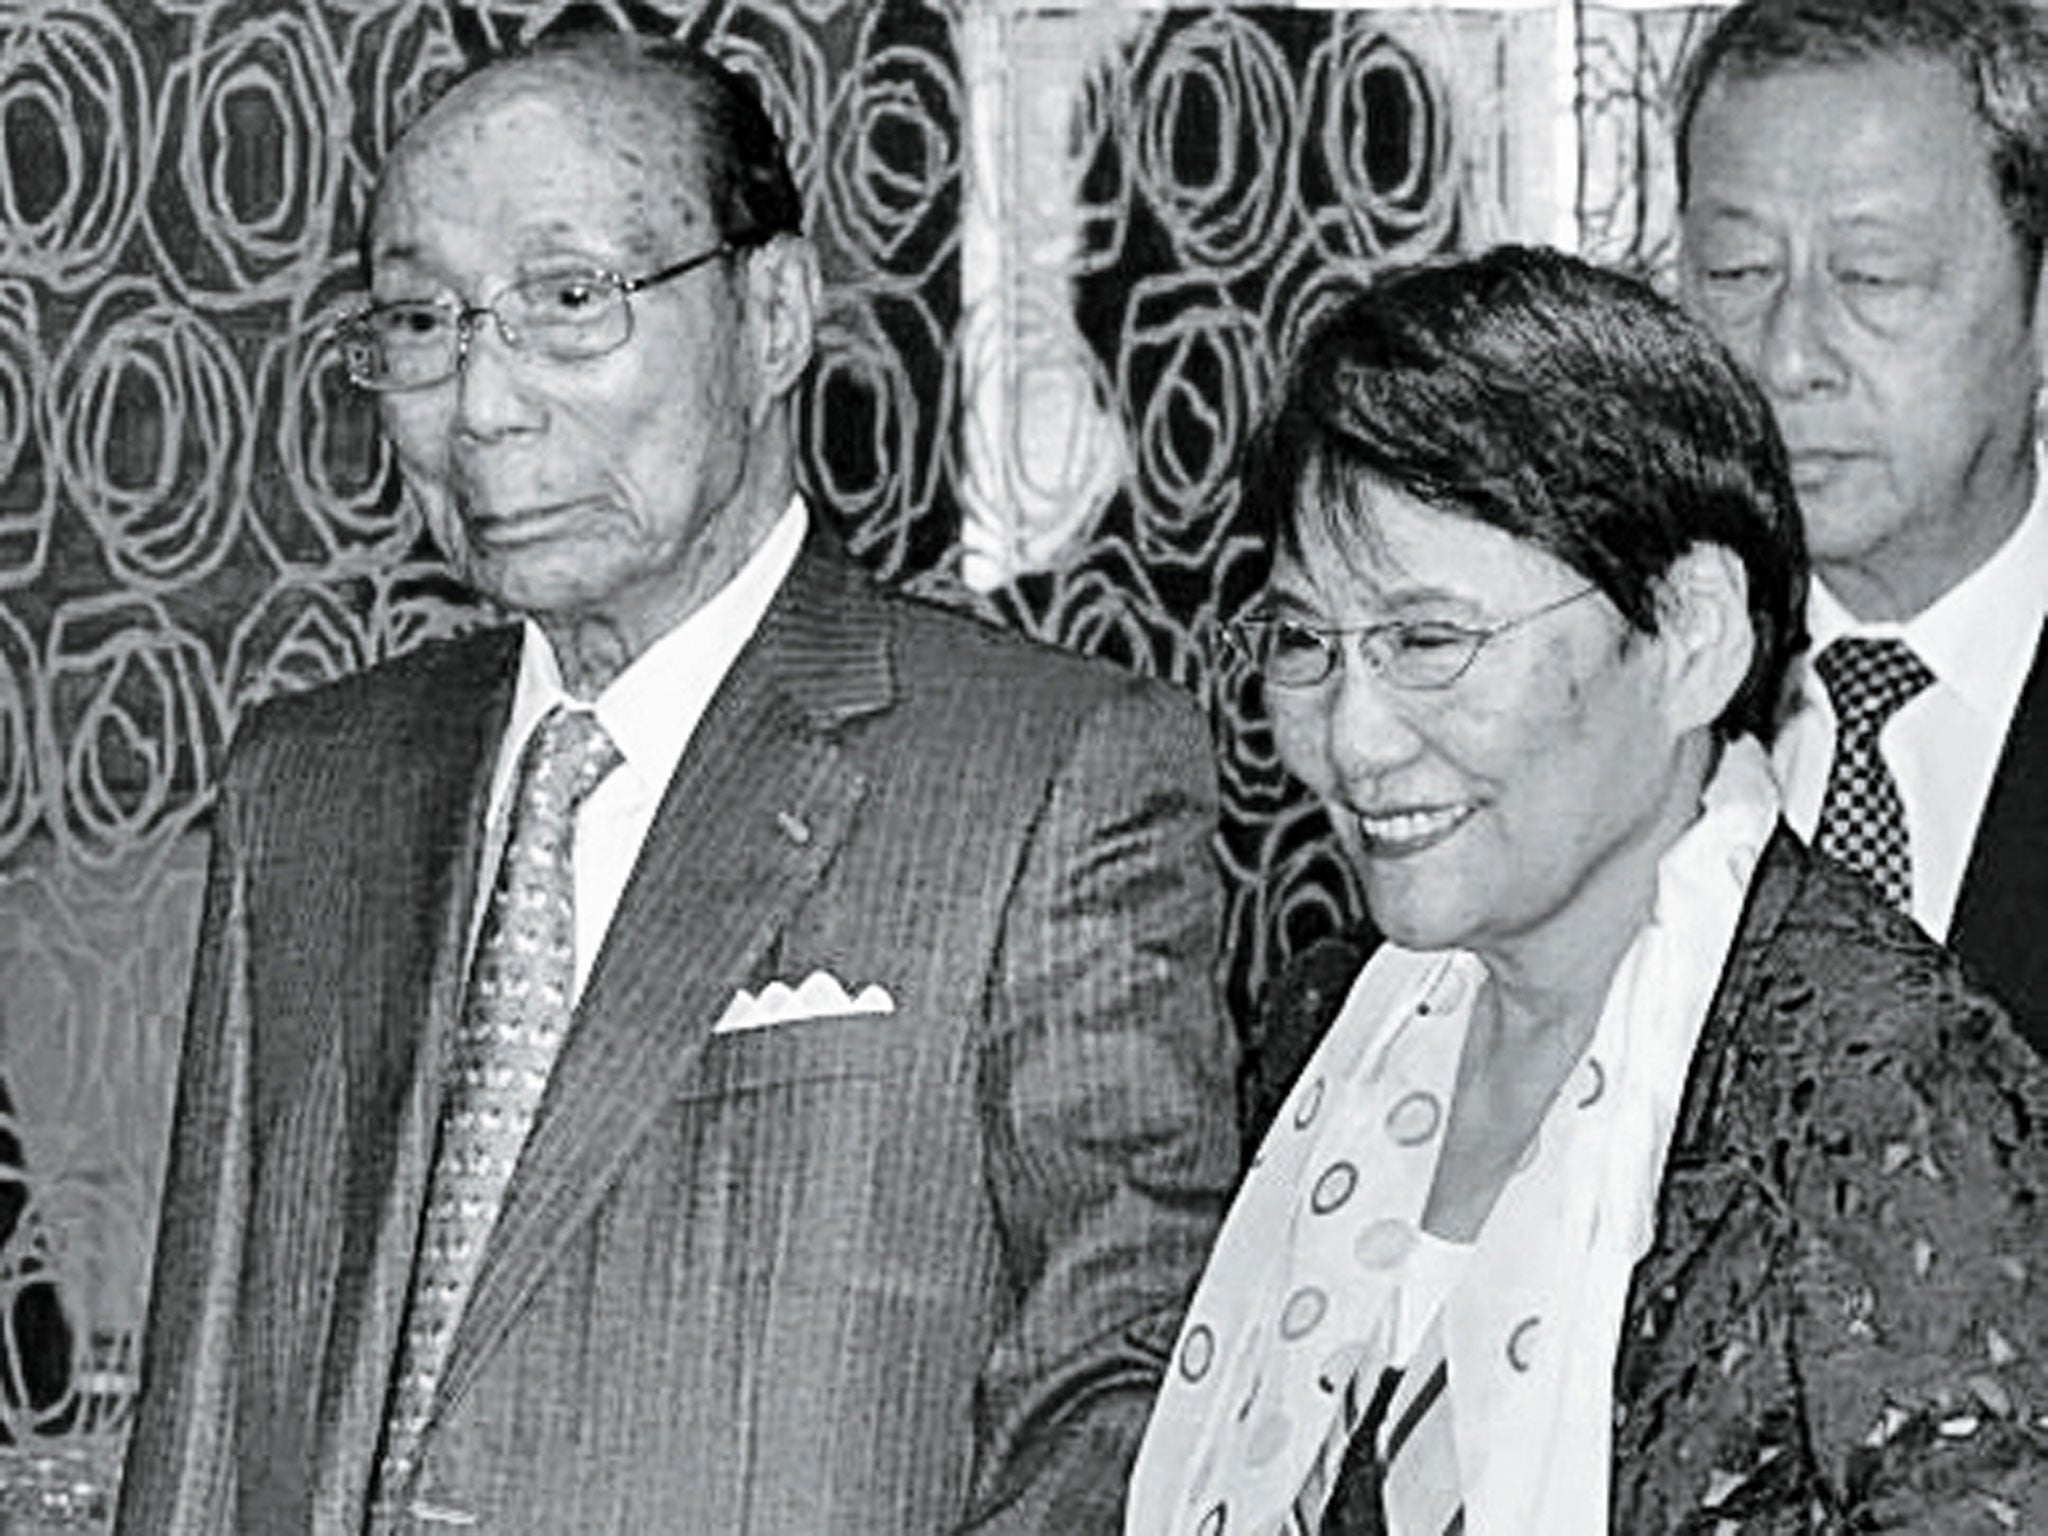 Shaw with his second wife Mona Fong, a singer who rose to be managing director of his company